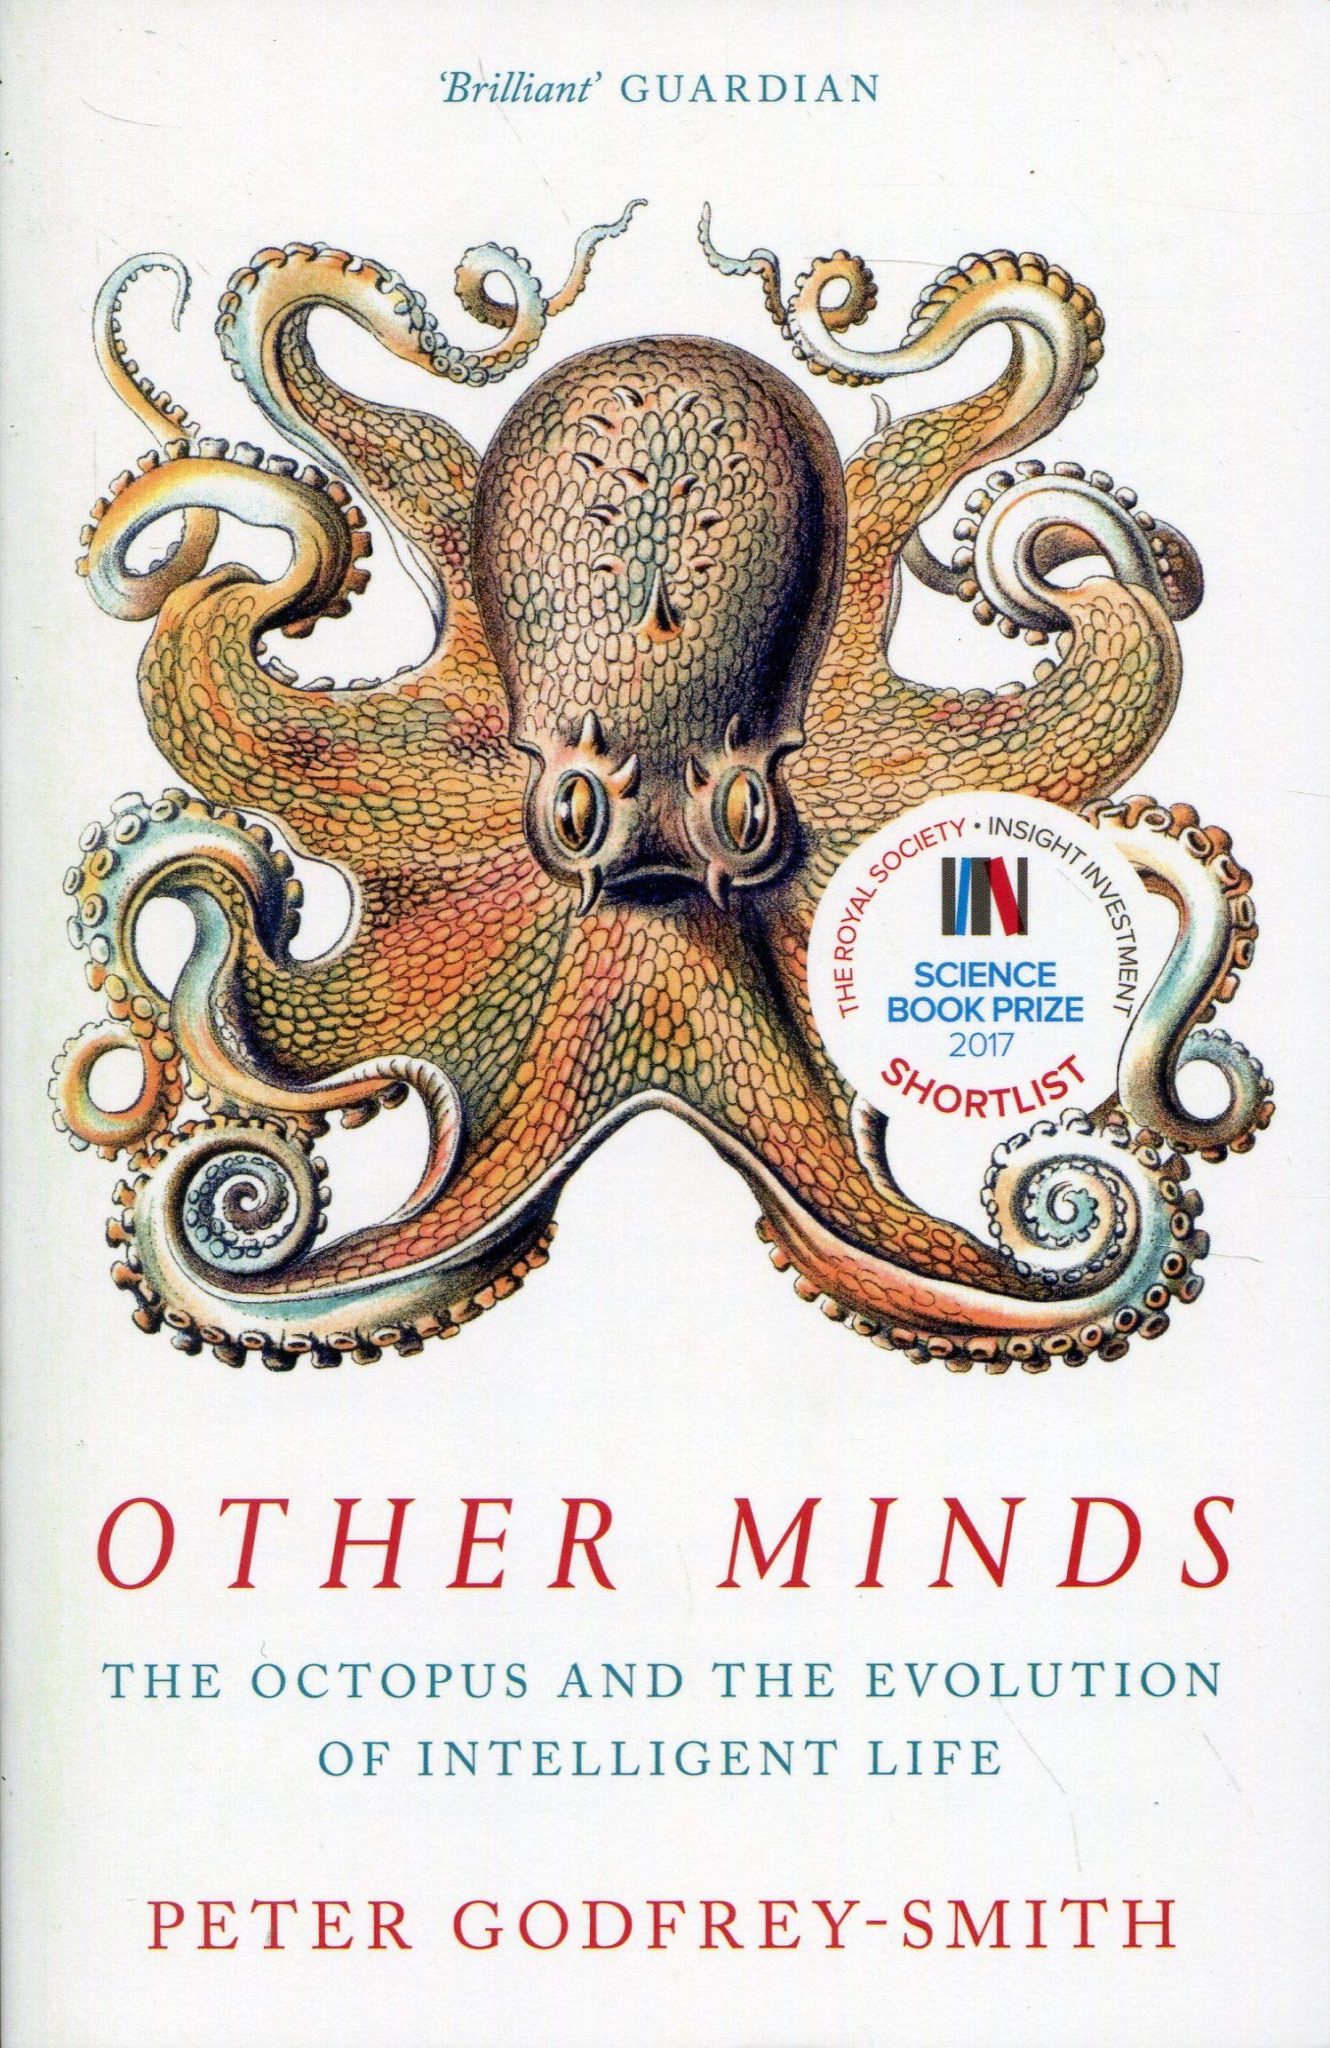 other minds by peter godfrey smith book cover